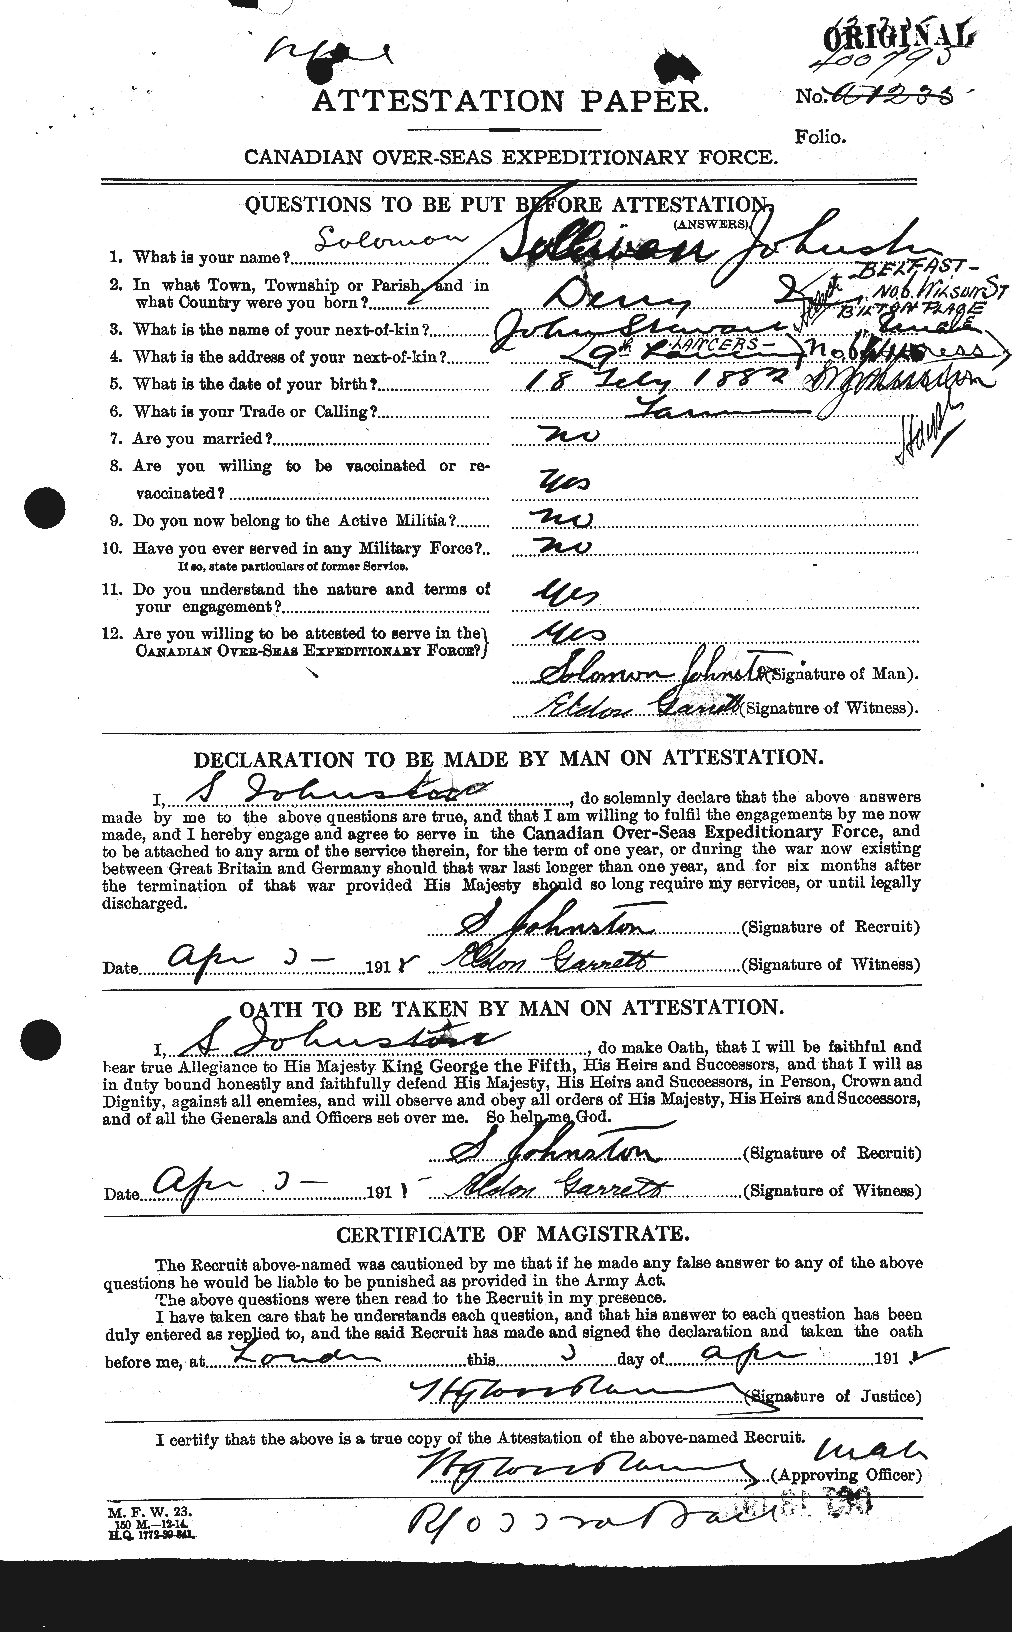 Personnel Records of the First World War - CEF 427097a